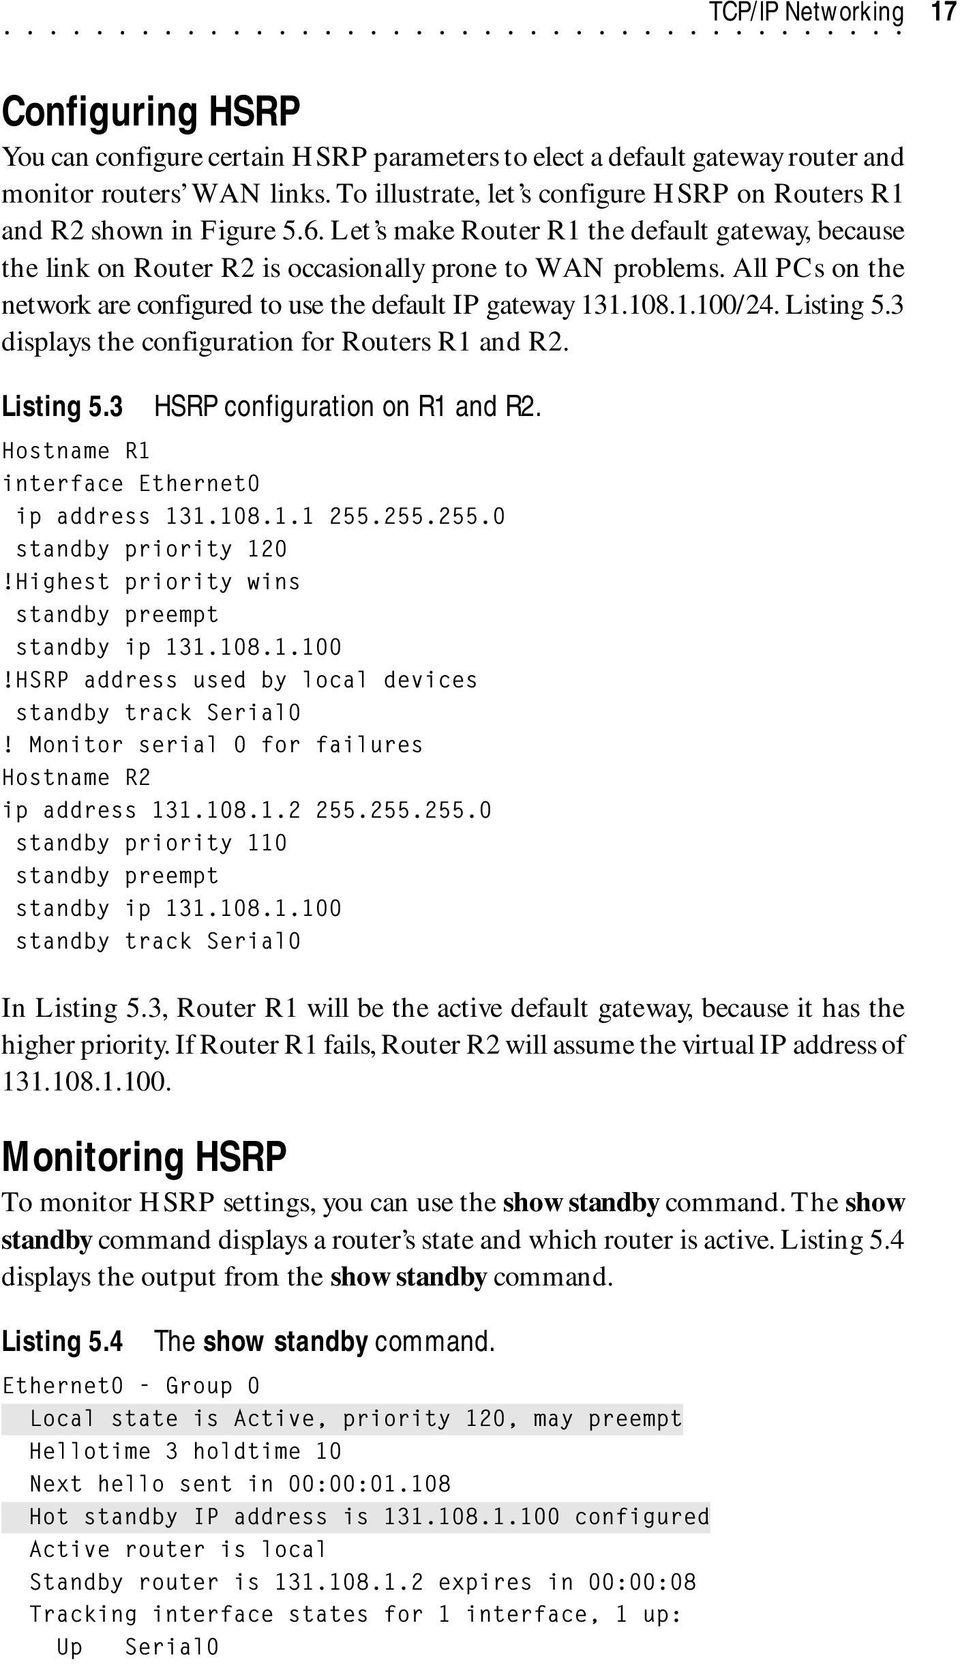 All PCs on the network are configured to use the default IP gateway 131.108.1.100/24. Listing 5.3 displays the configuration for Routers R1 and R2. Listing 5.3 HSRP configuration on R1 and R2.